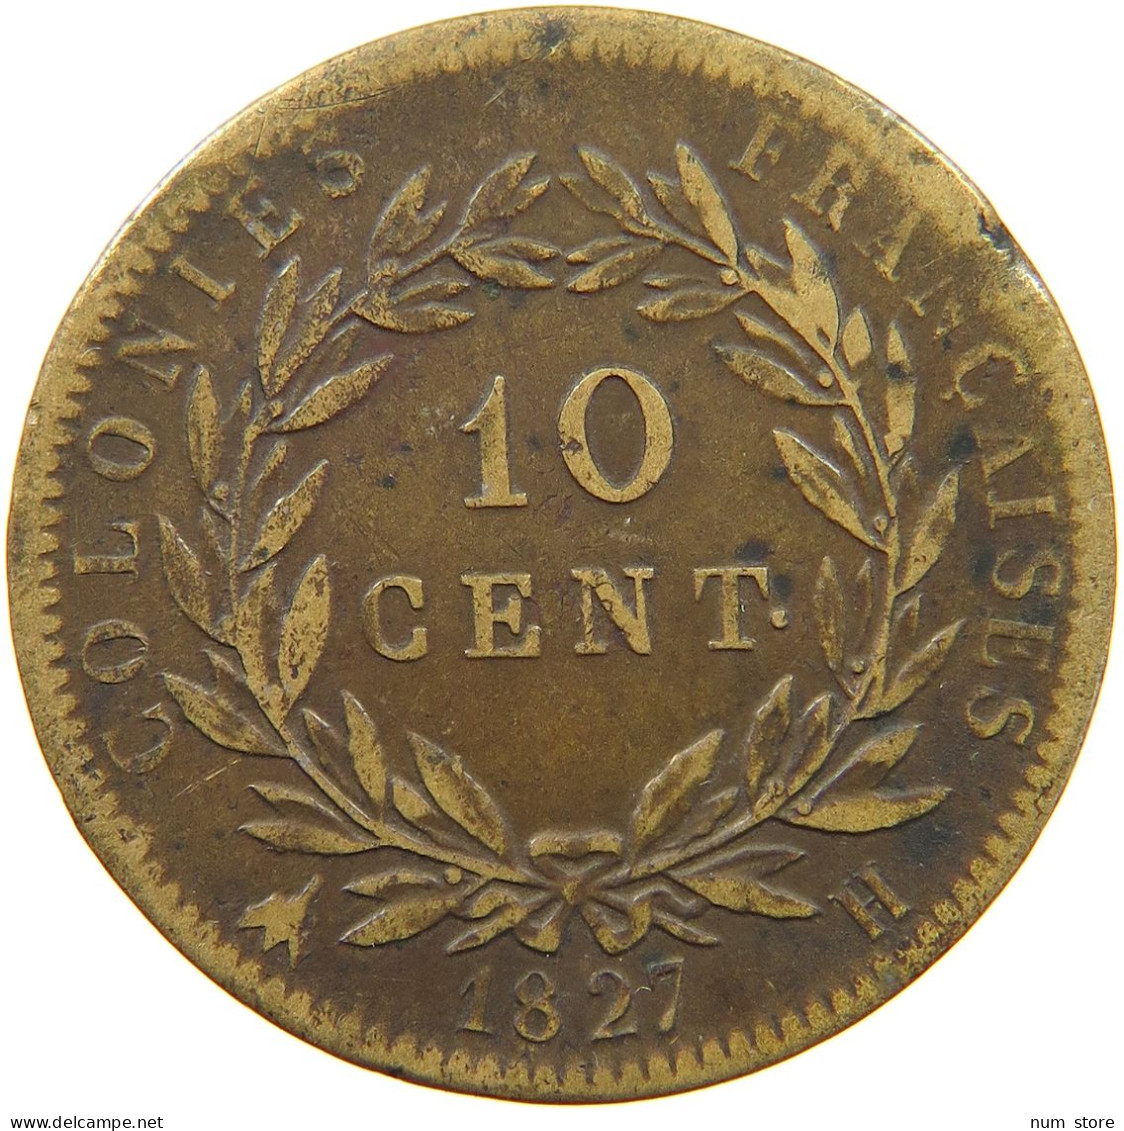 FRANCE COLONIES 10 CENTIMES 1827 H Charles X. (1824-1830) #t120 0395 - French Colonies (1817-1844)